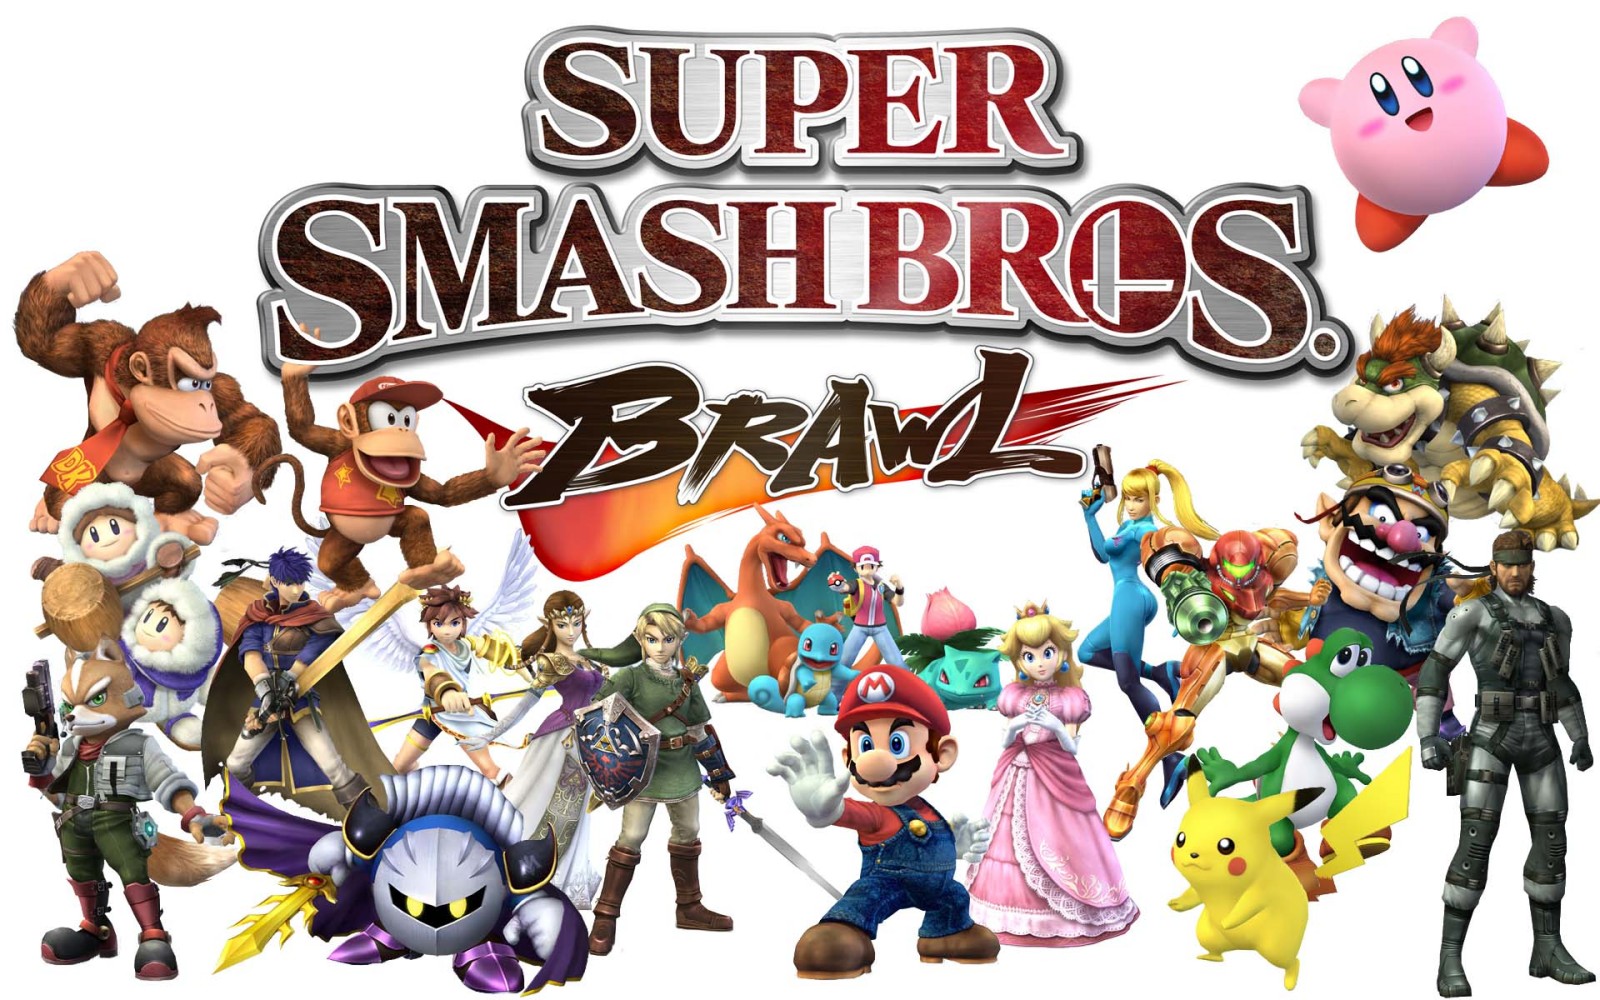 Amazing Super Smash Bros. Brawl Pictures & Backgrounds